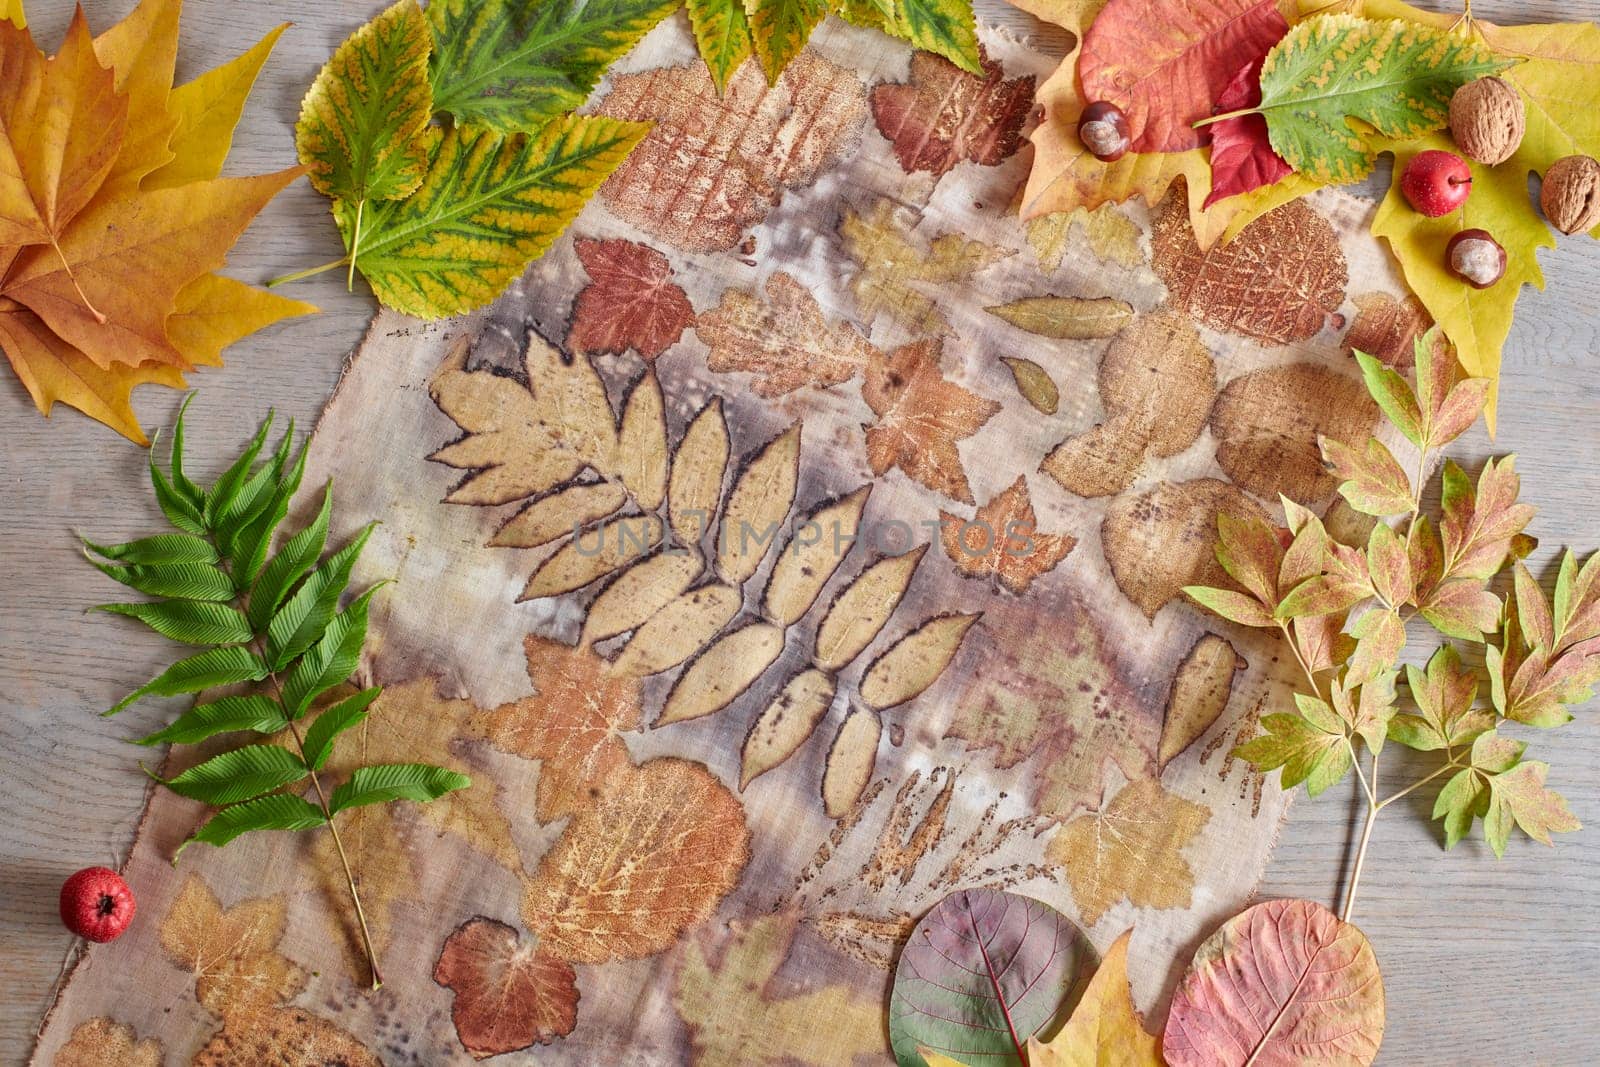 Autumn leaves, nuts and berries lying on hand-dyed fabric strip using eco-print technique